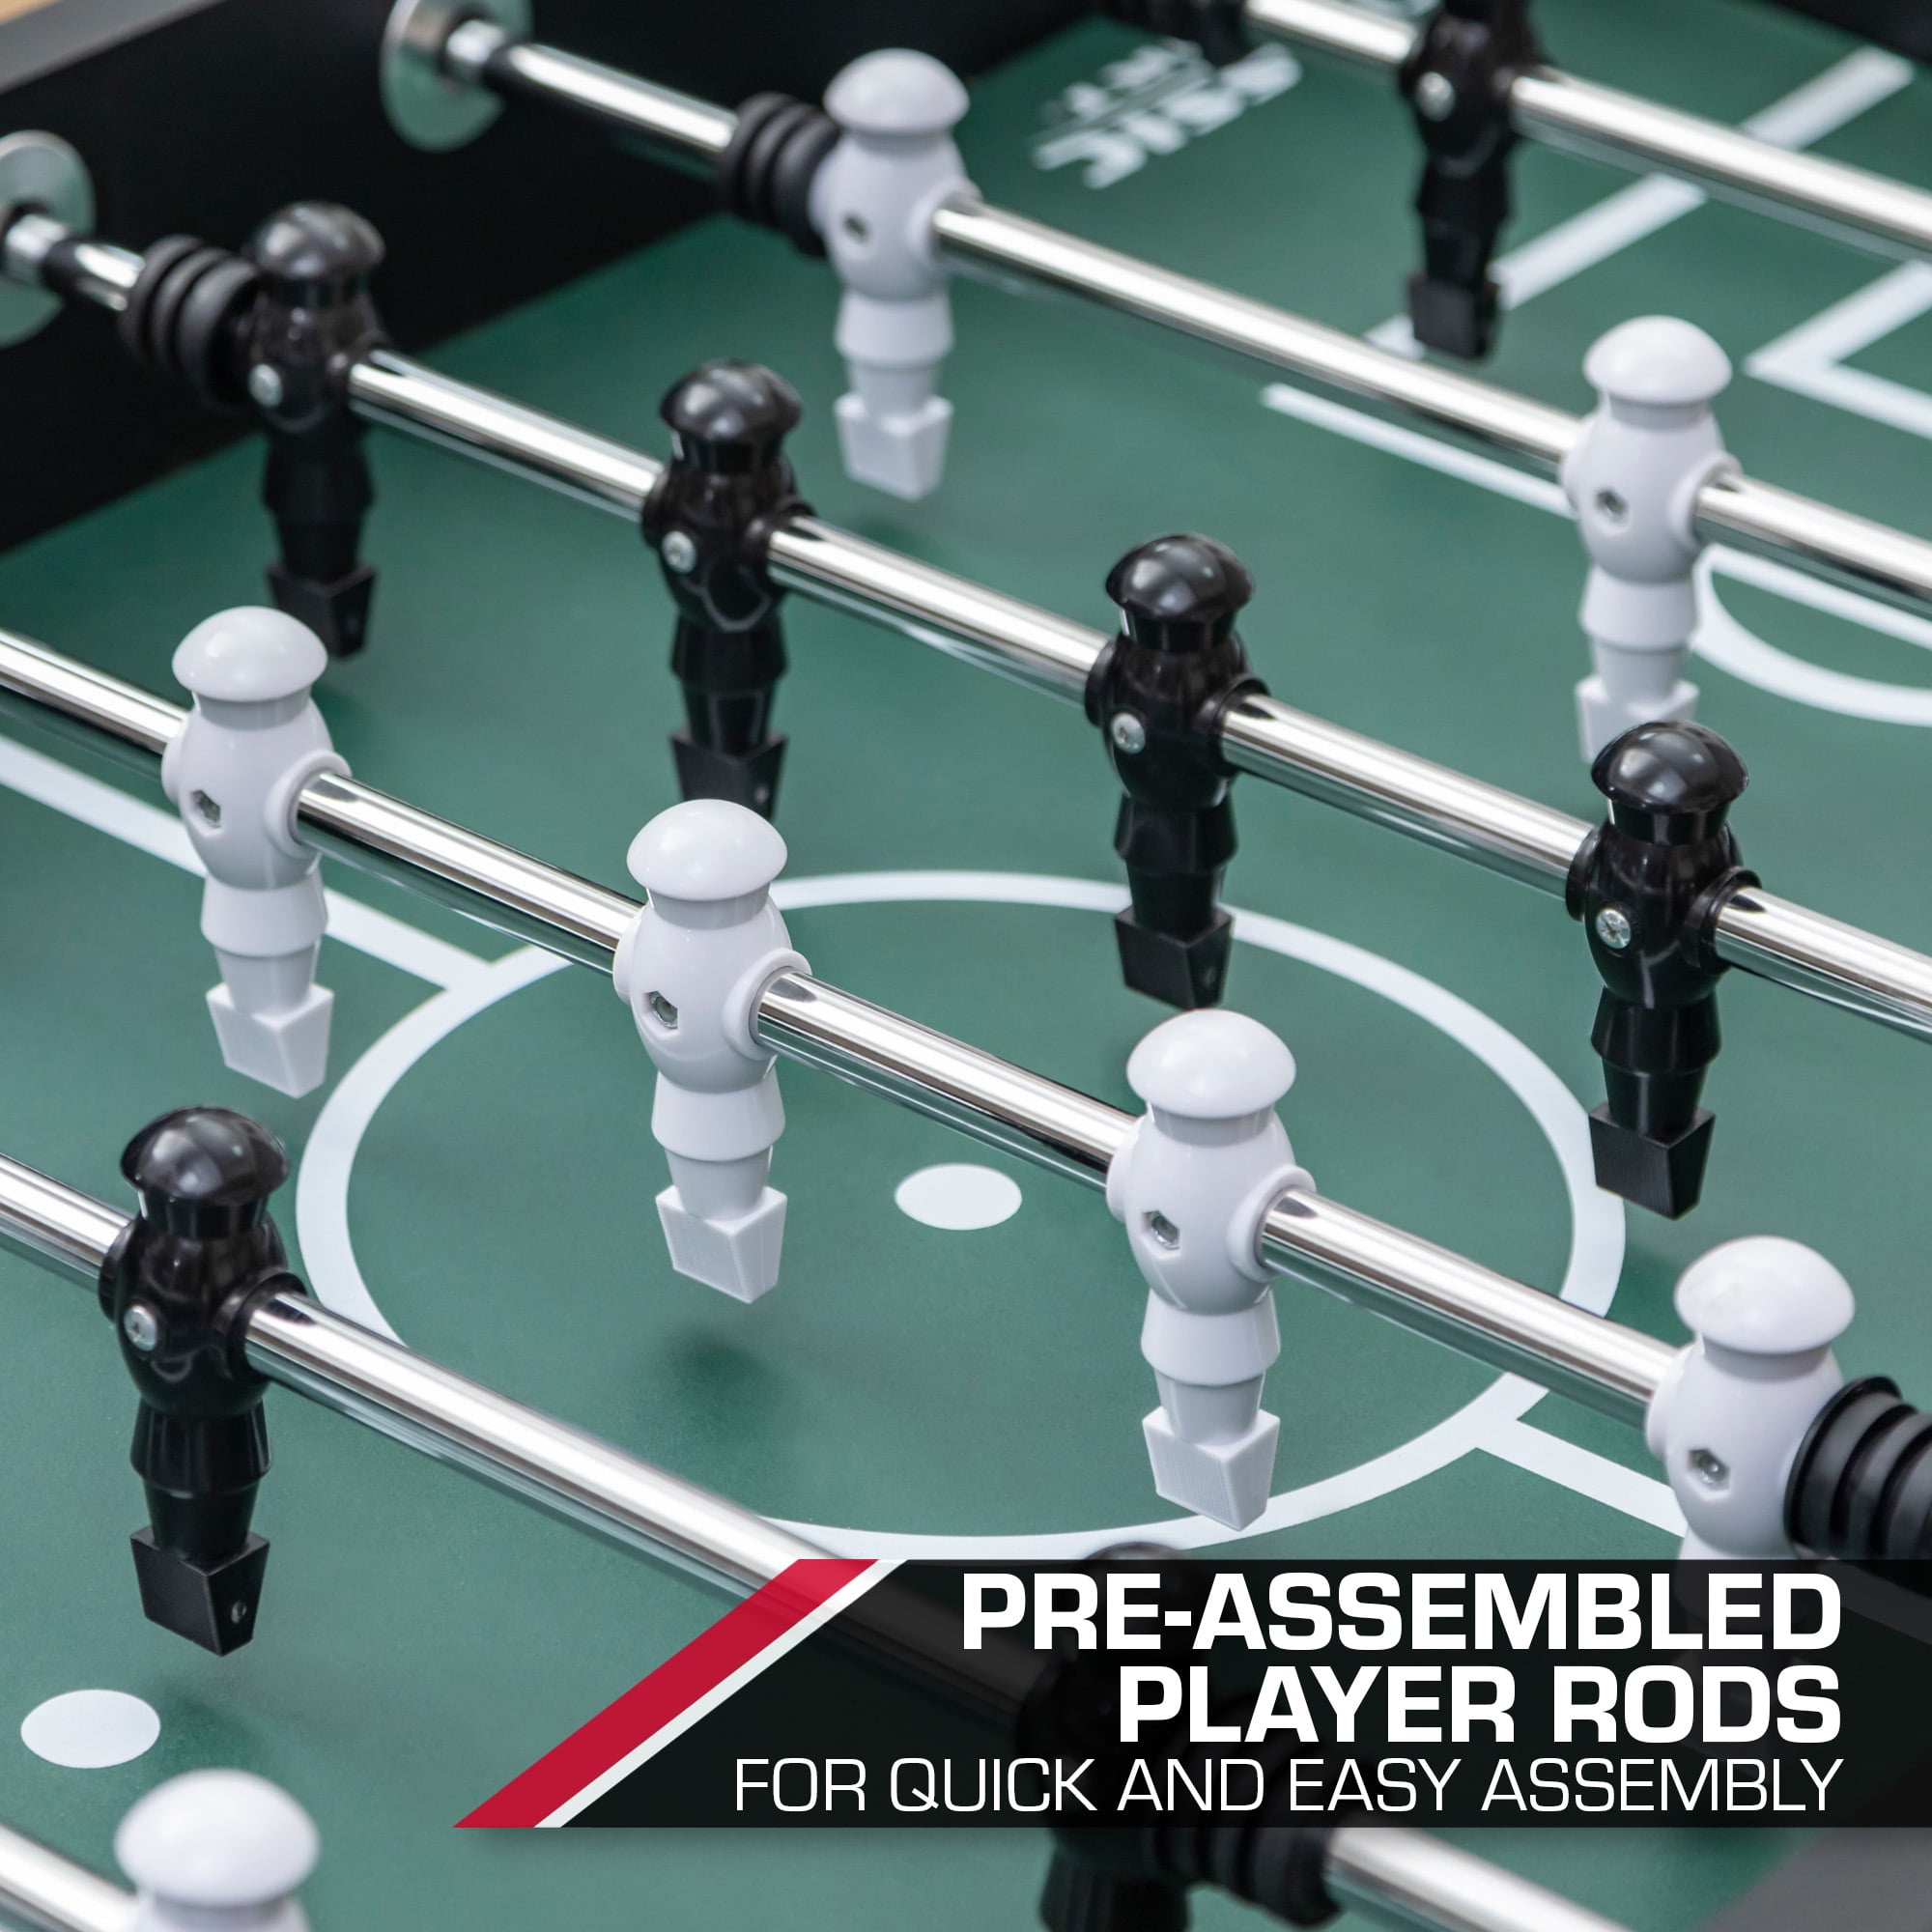 Classic Foosball Soccer Table 56 Official Size Babyfoot Table